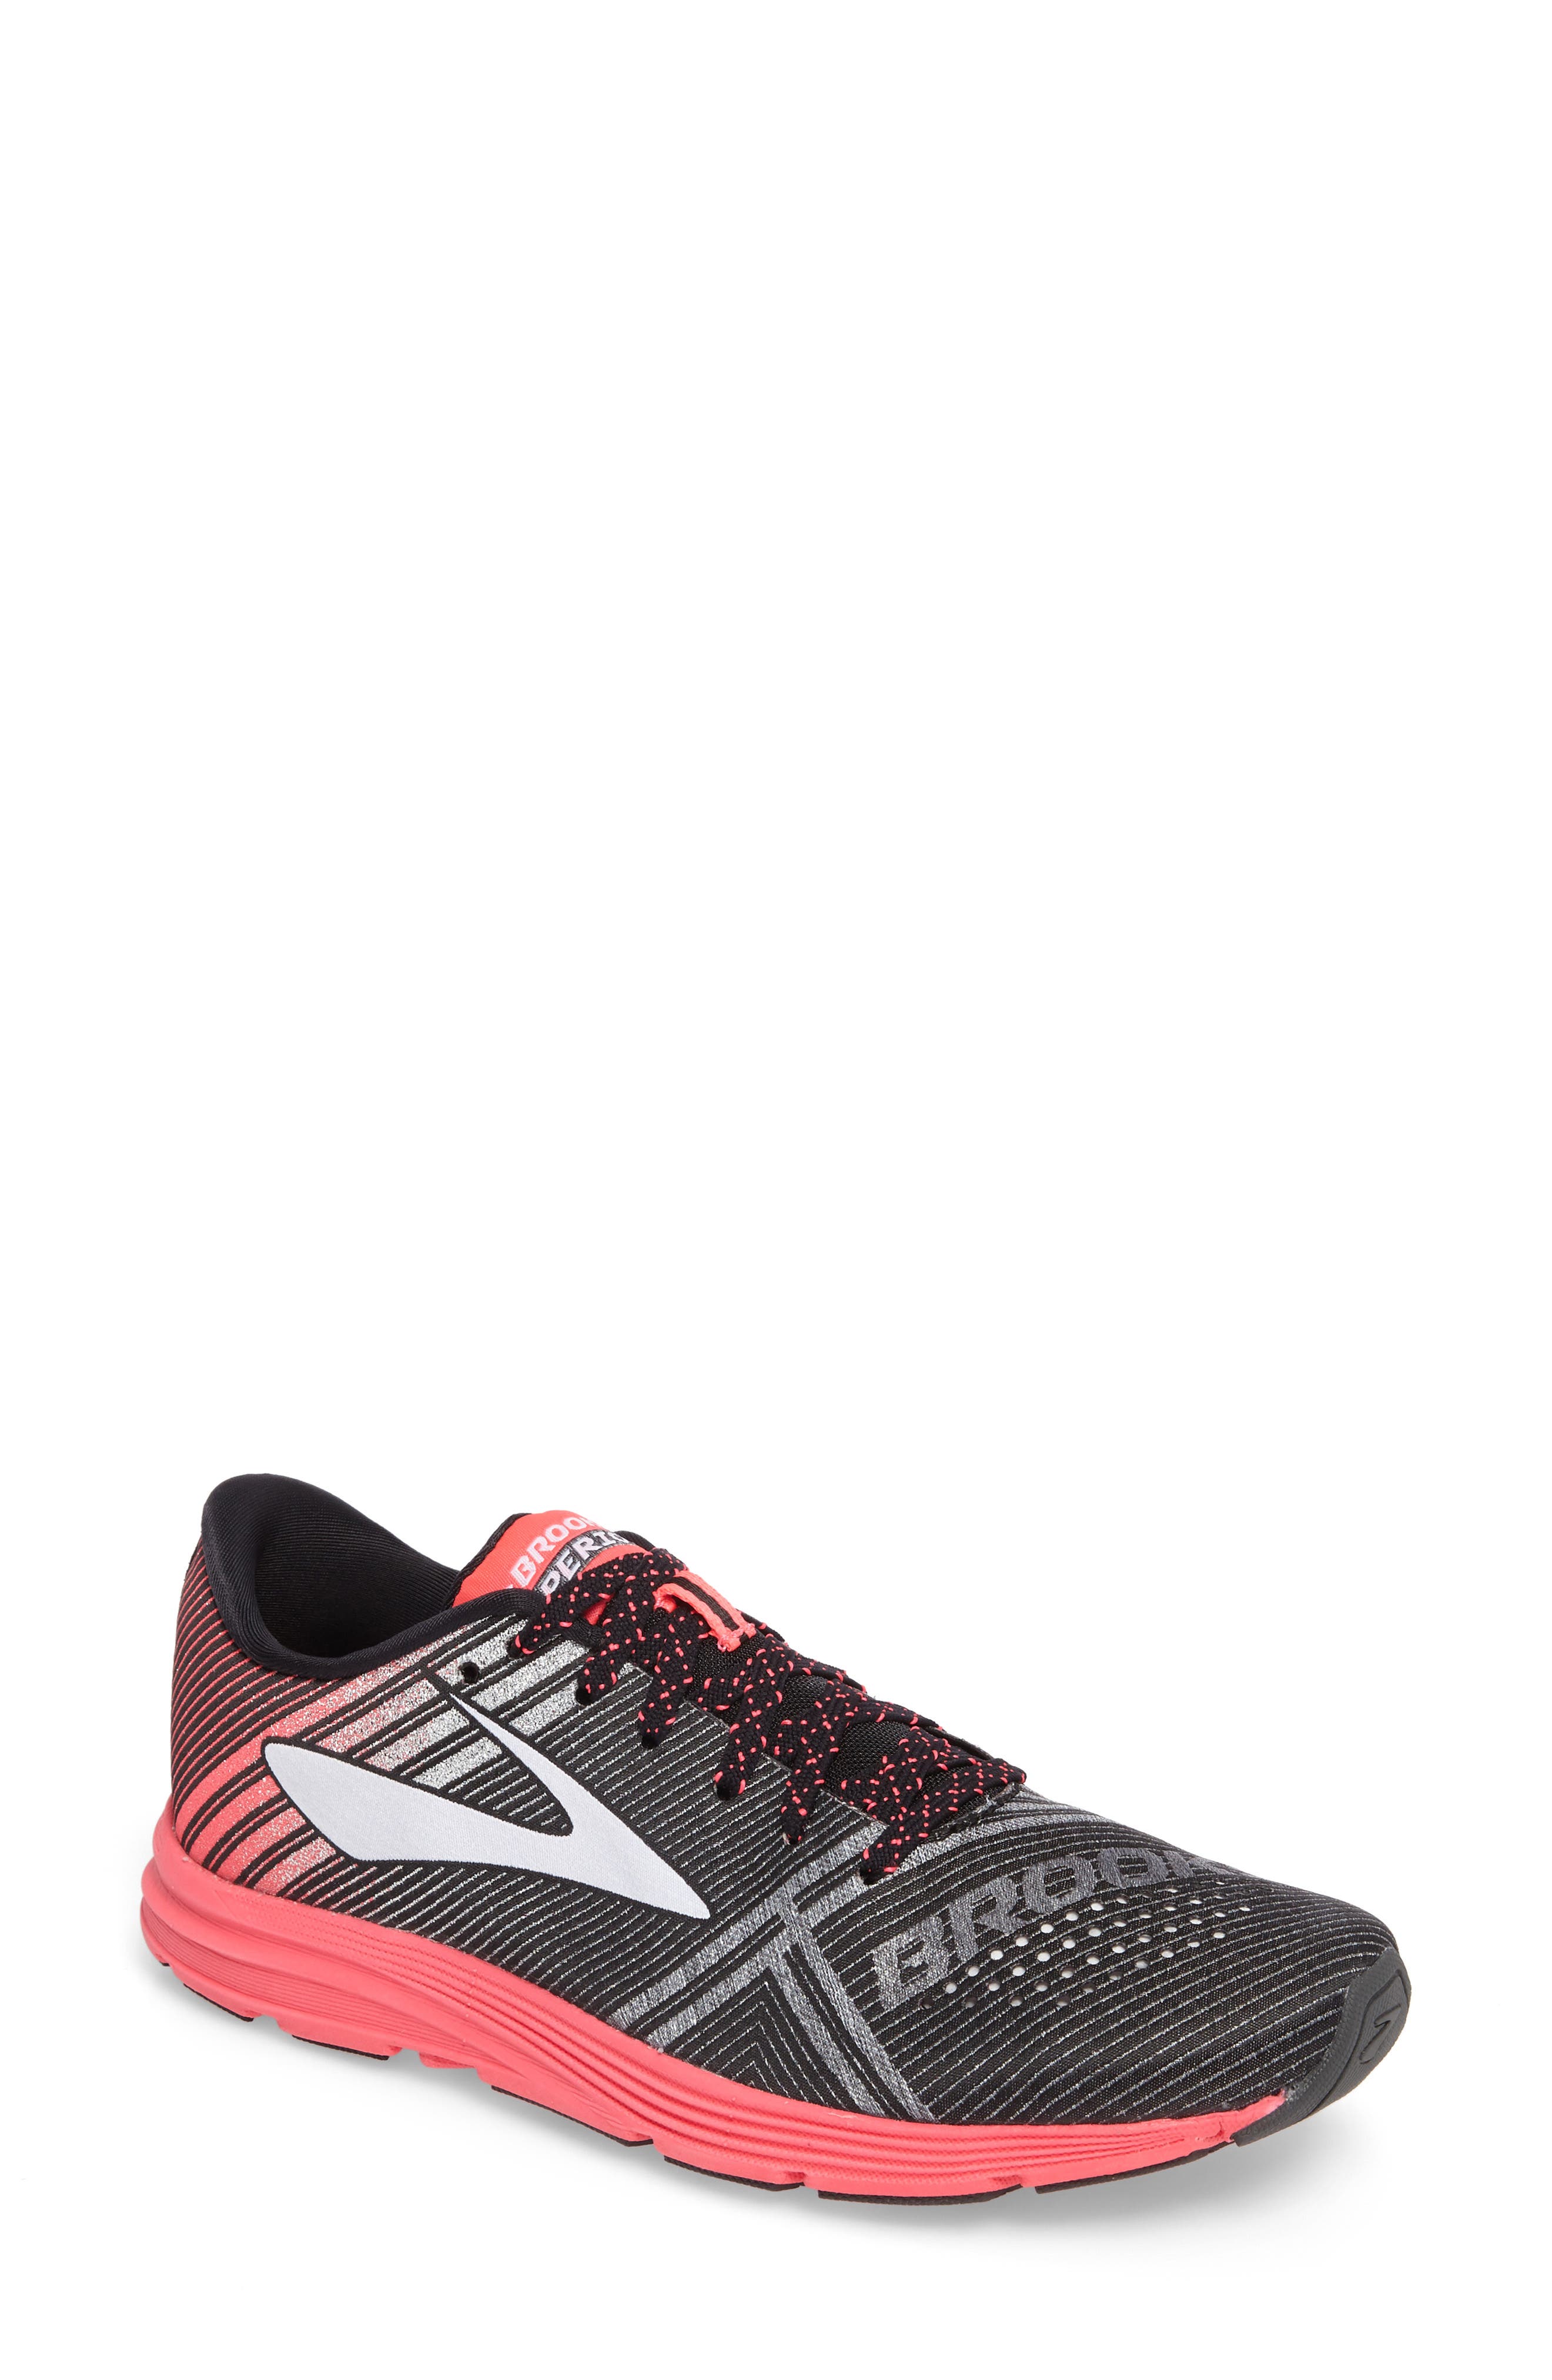 brooks hyperion running shoes